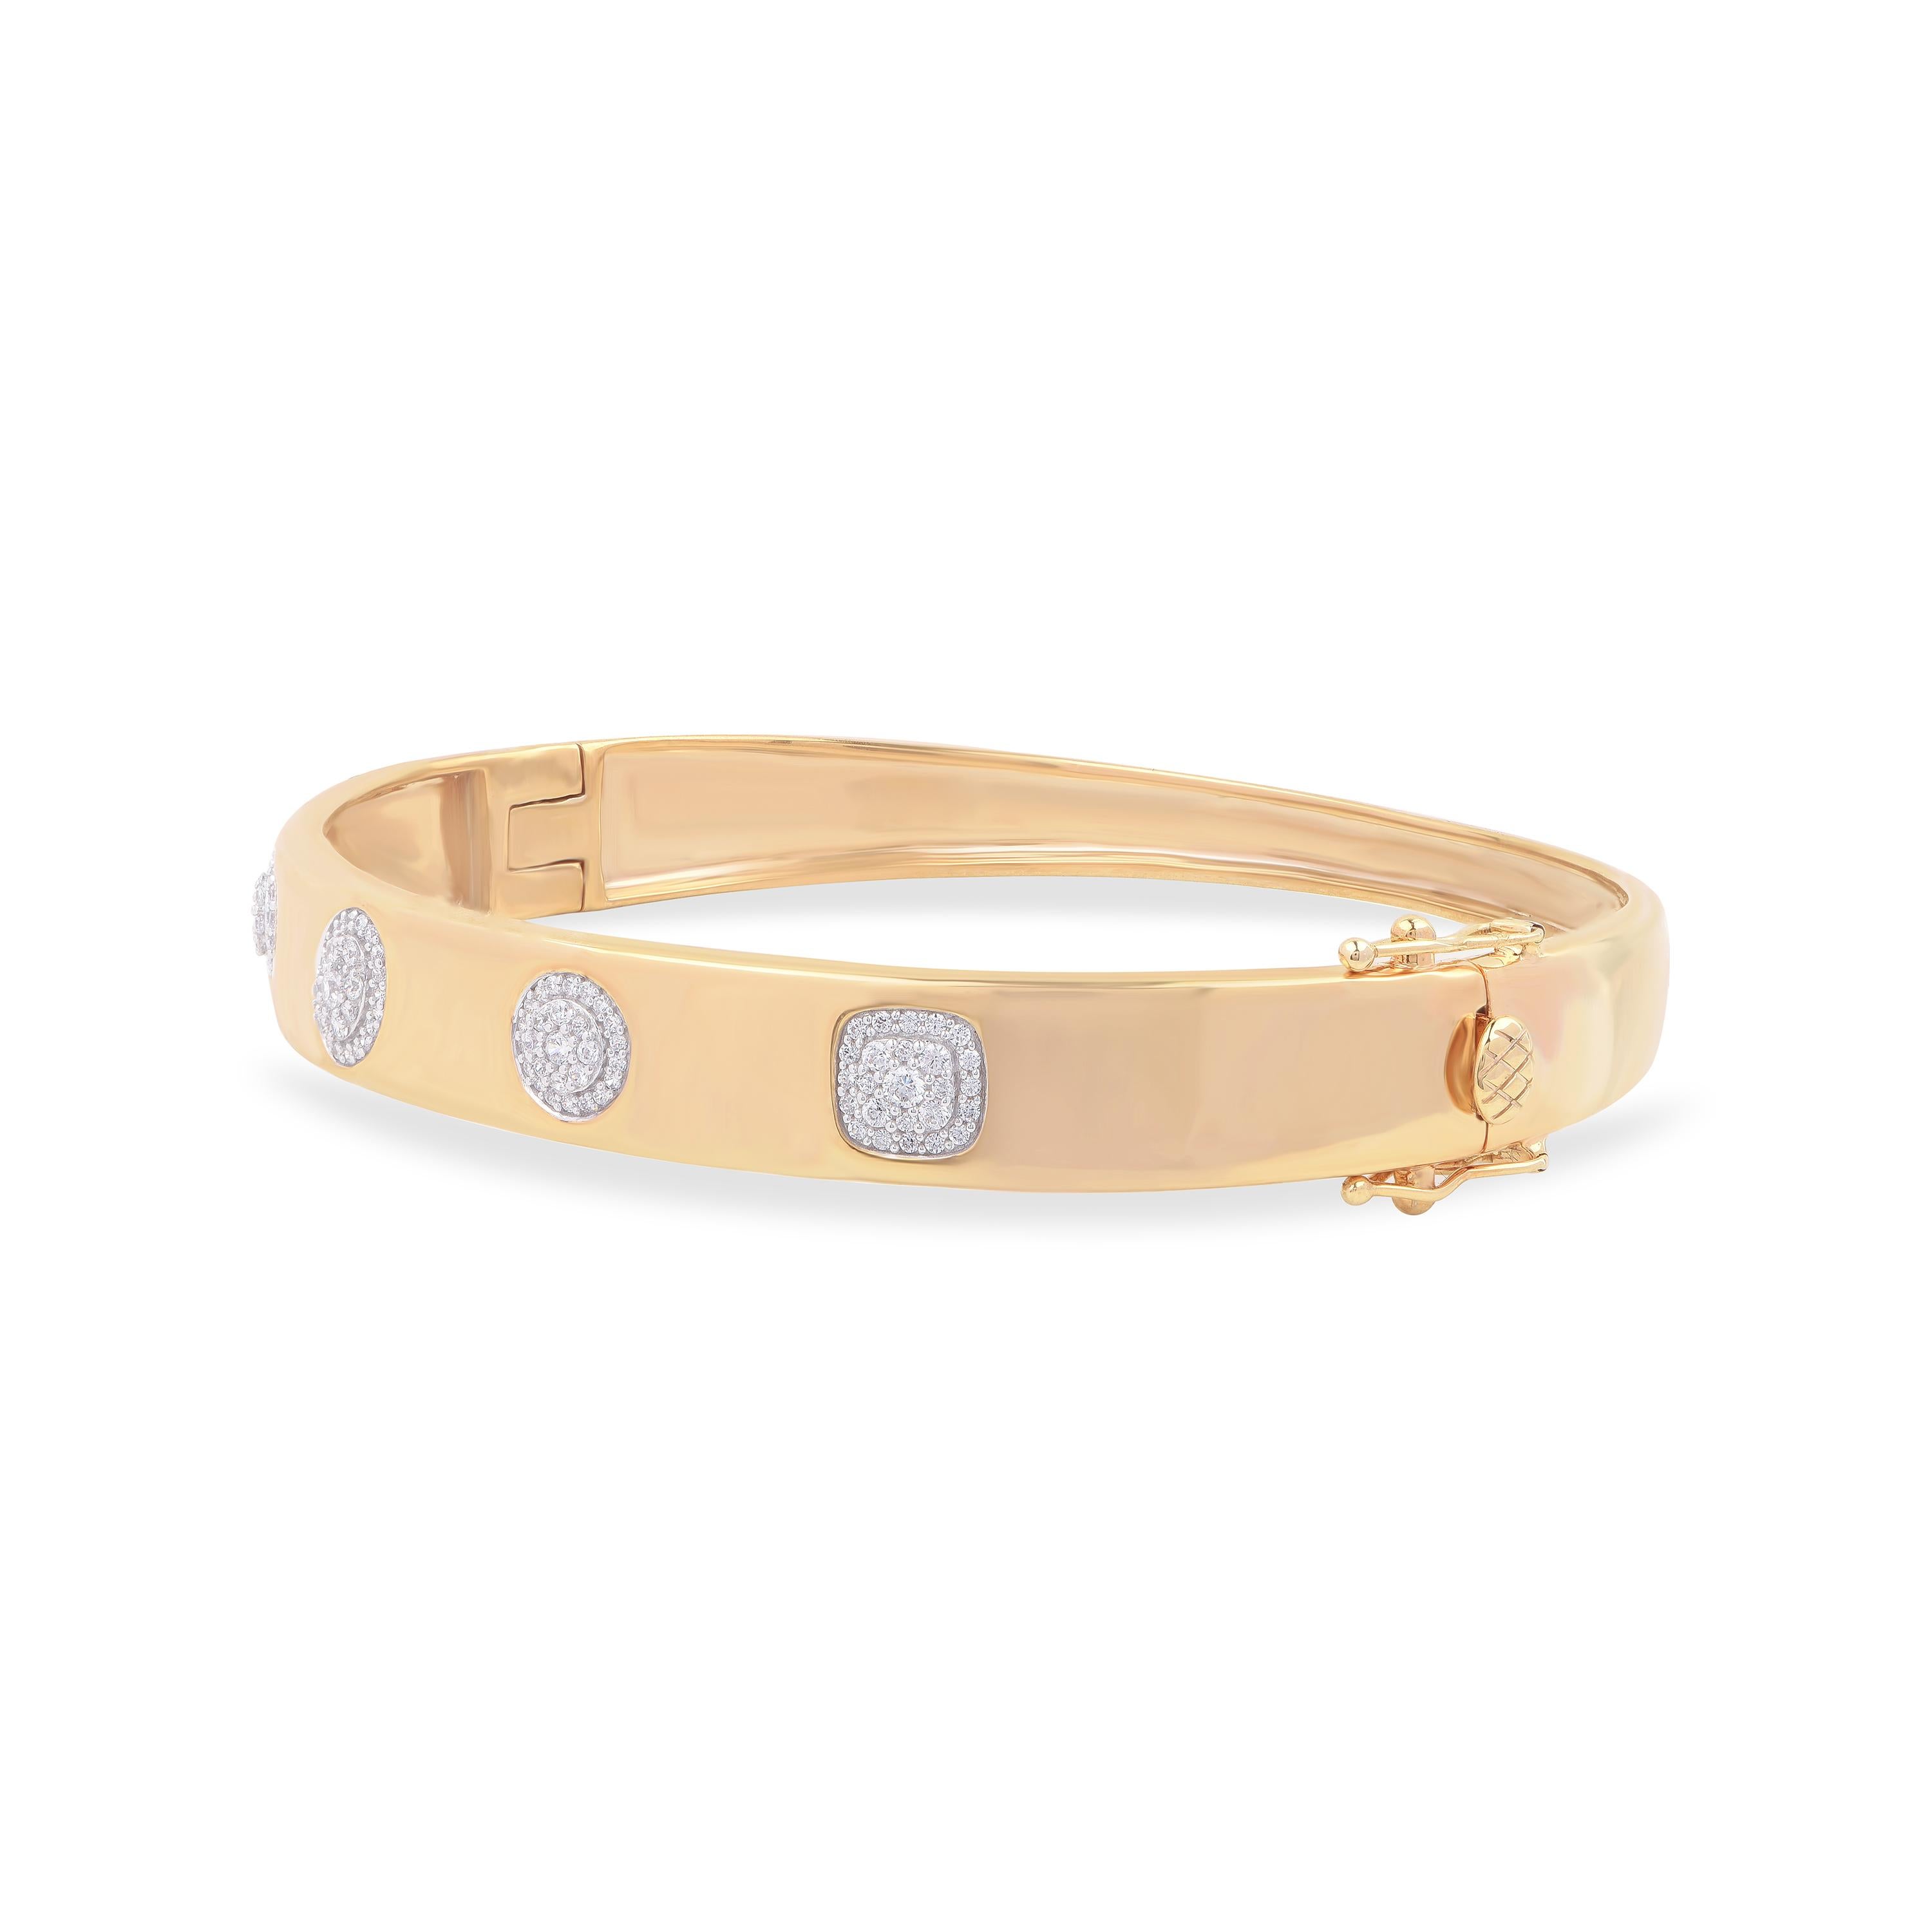 Beautifully hand-crafted by our skillful craftsmen in 18-karat yellow gold, this bangle features 109 brilliant-cut diamonds studded beautifully in prong and pave setting. The diamonds are graded H-I Color, I2 Clarity.